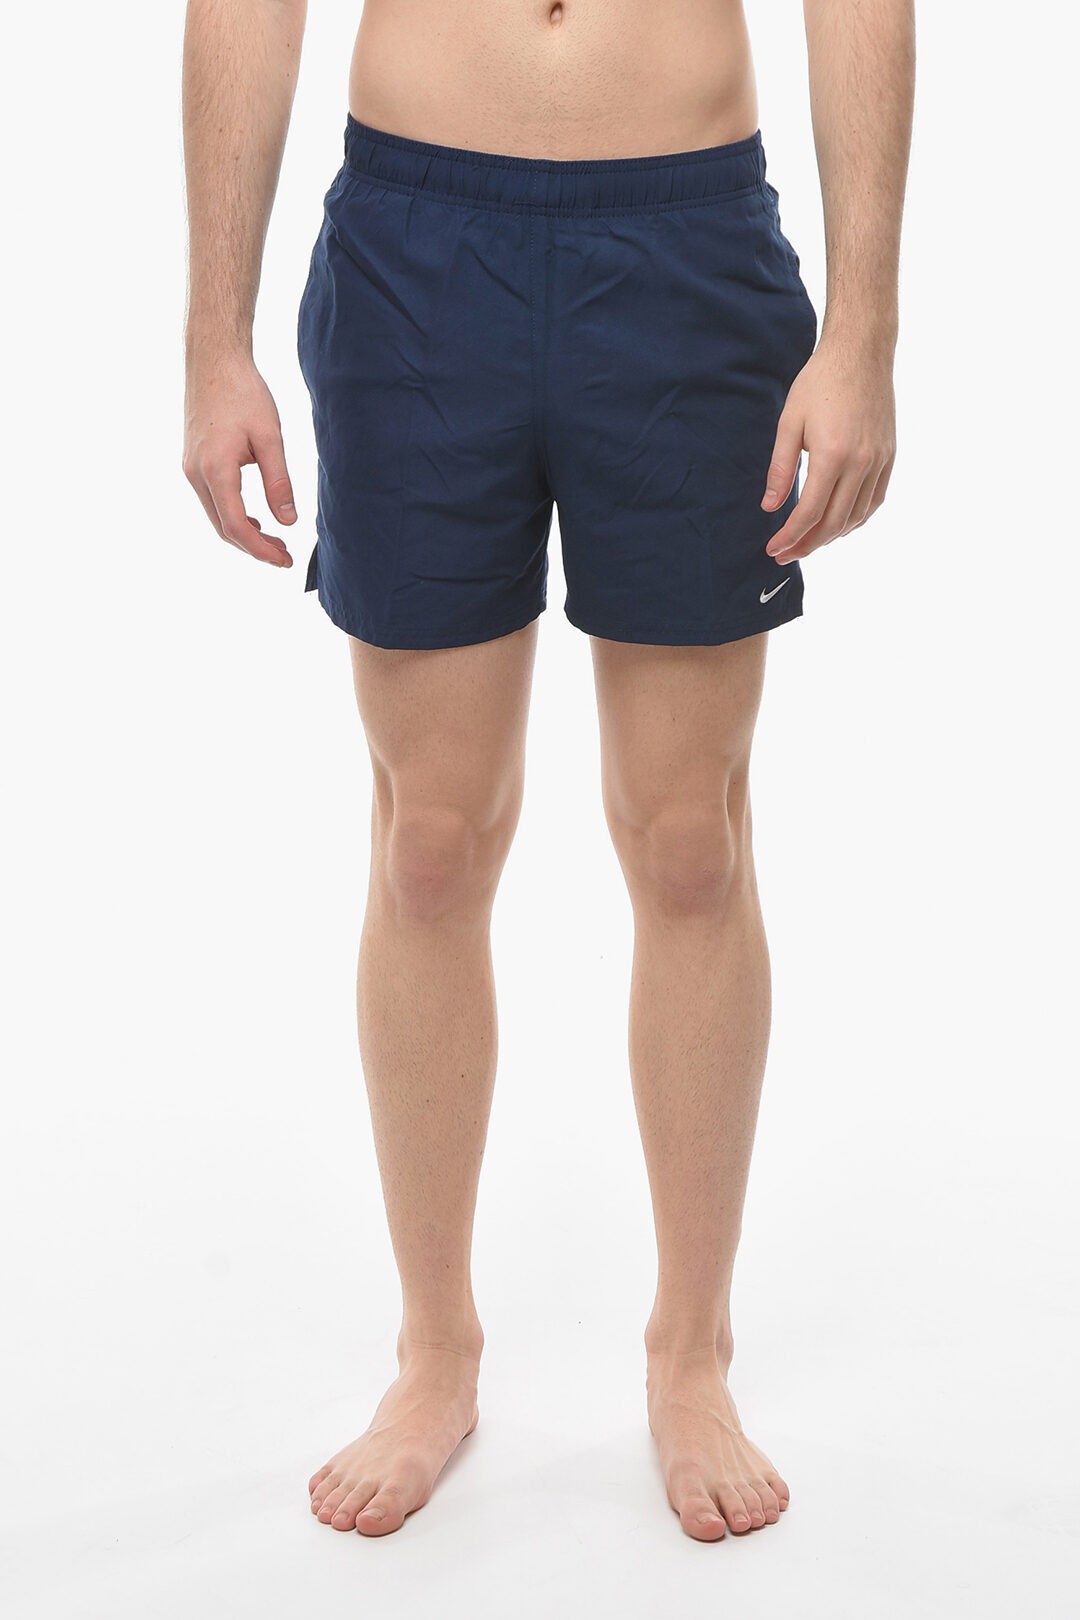 NIKE iCL XCEFA NESSA560-440 Y SWIM SOLID COLOR SWIM SHORTS WITH EMBROIDERED LOGO y֐ŁEzybsOz dk